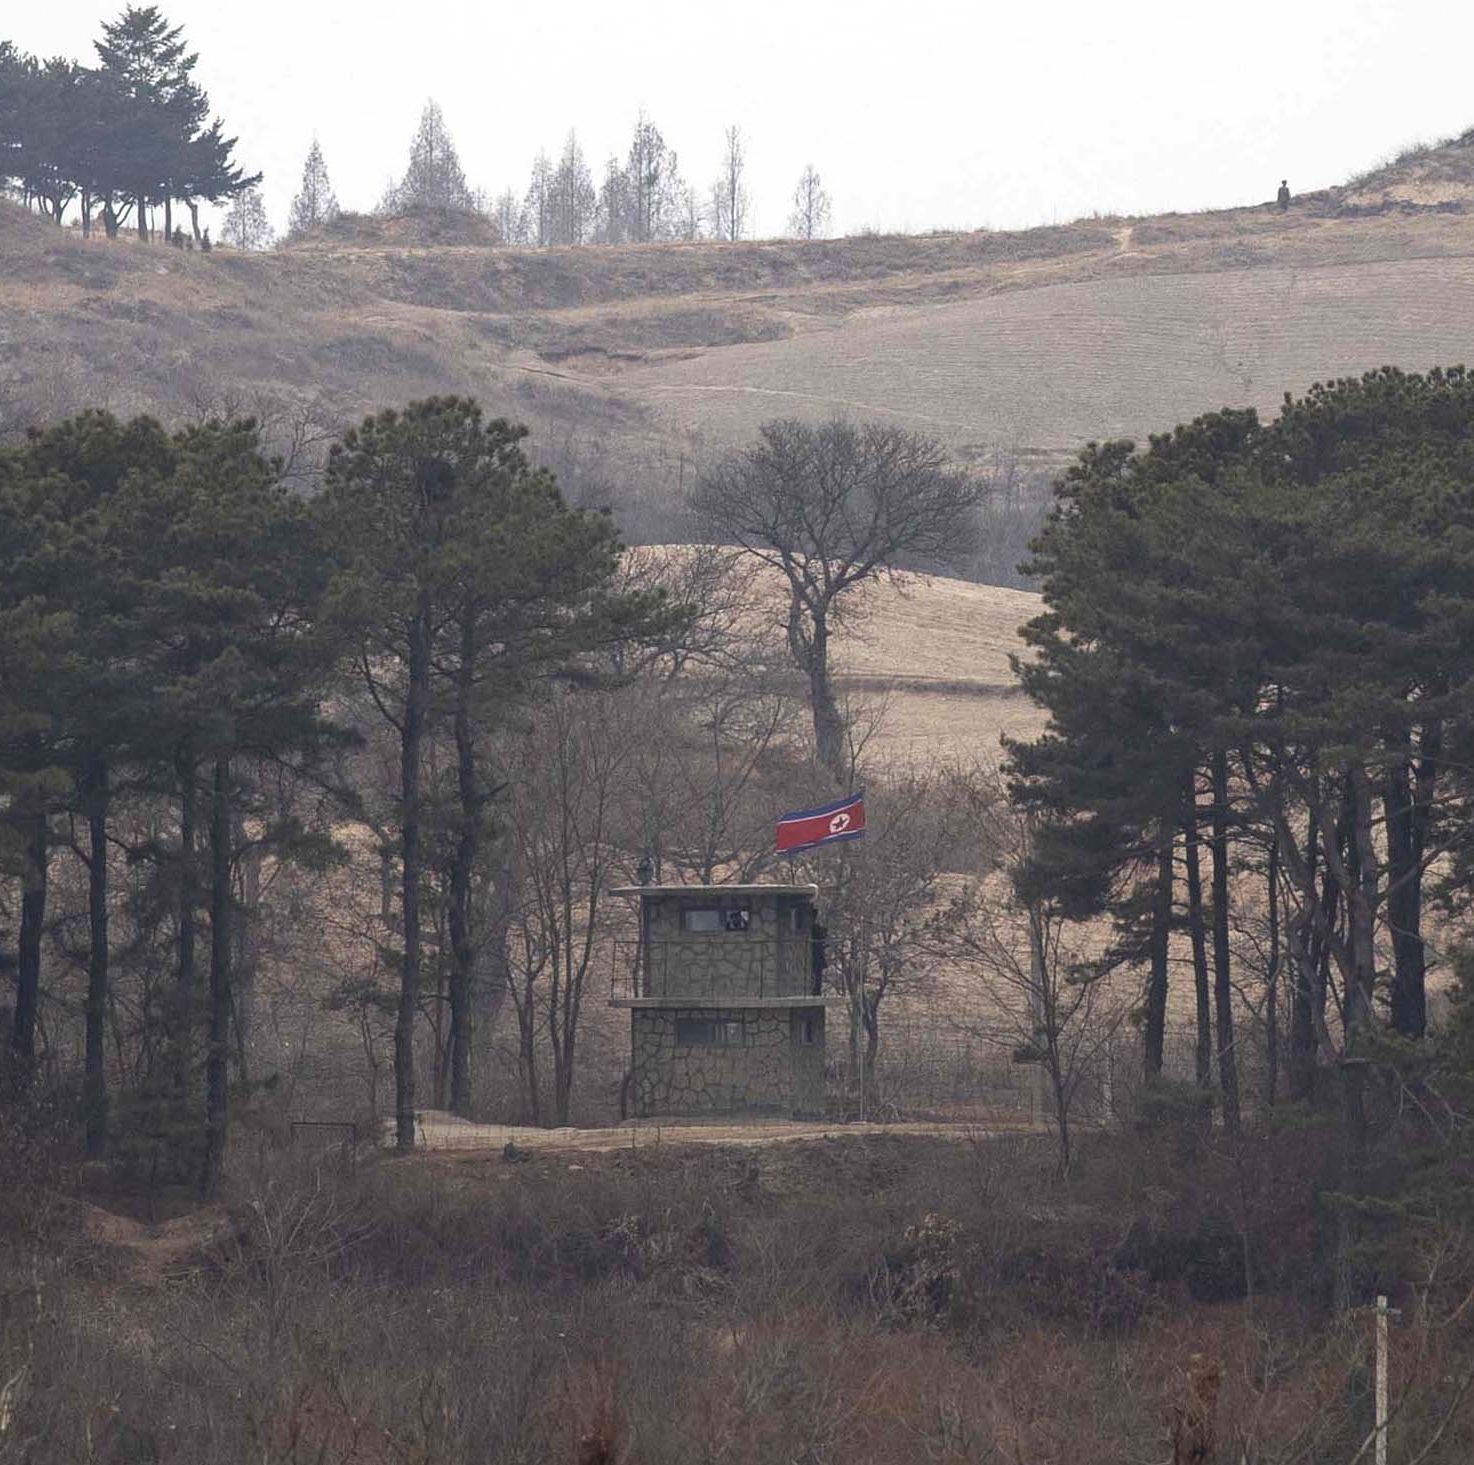 Only 6 Americans Have Defected Across the Korean DMZ—and Most Quickly Became Propaganda